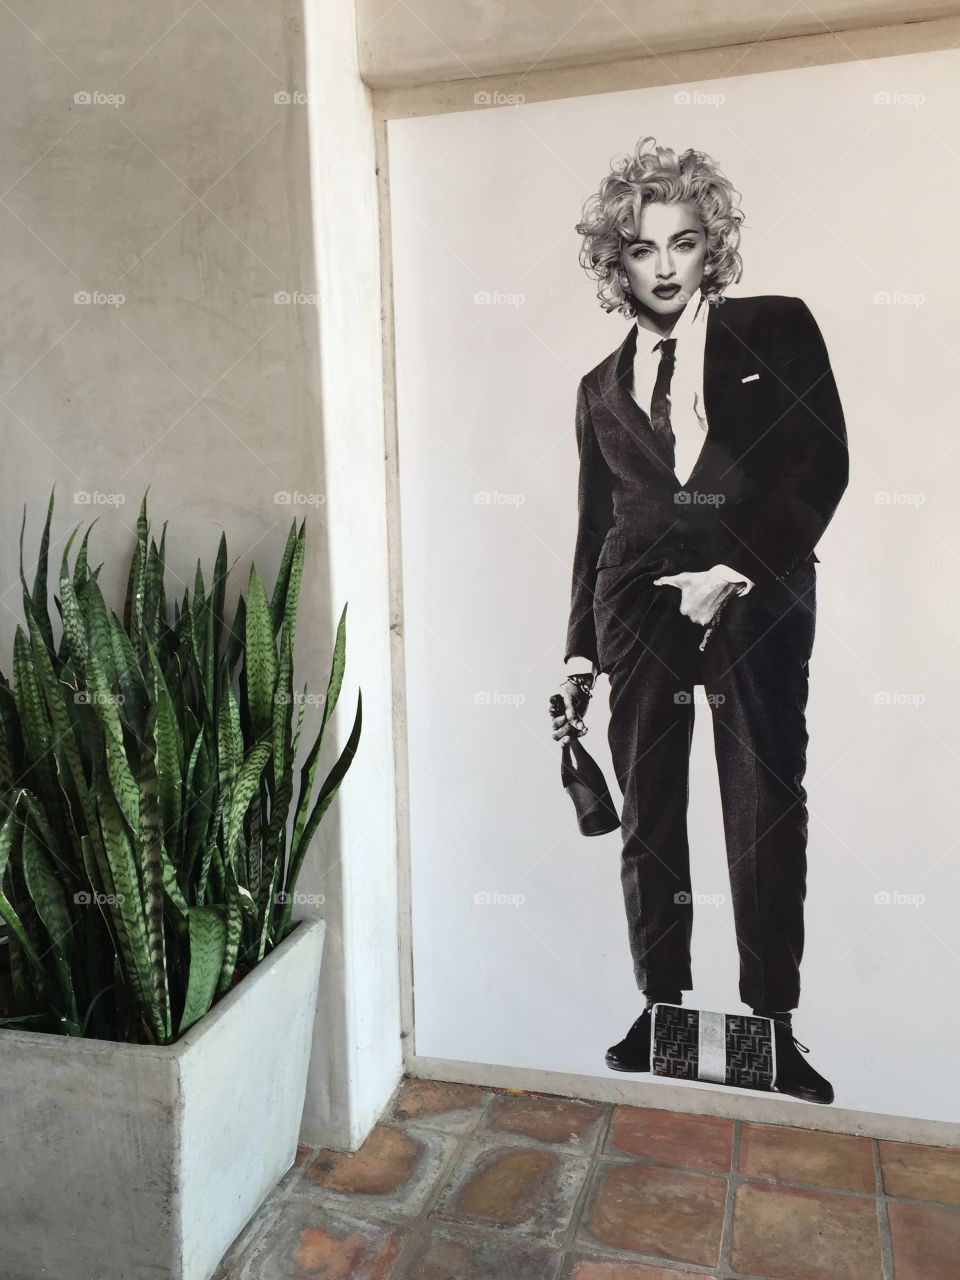 Madonna in a Suit. Store wall with Madonna image wearing a suit